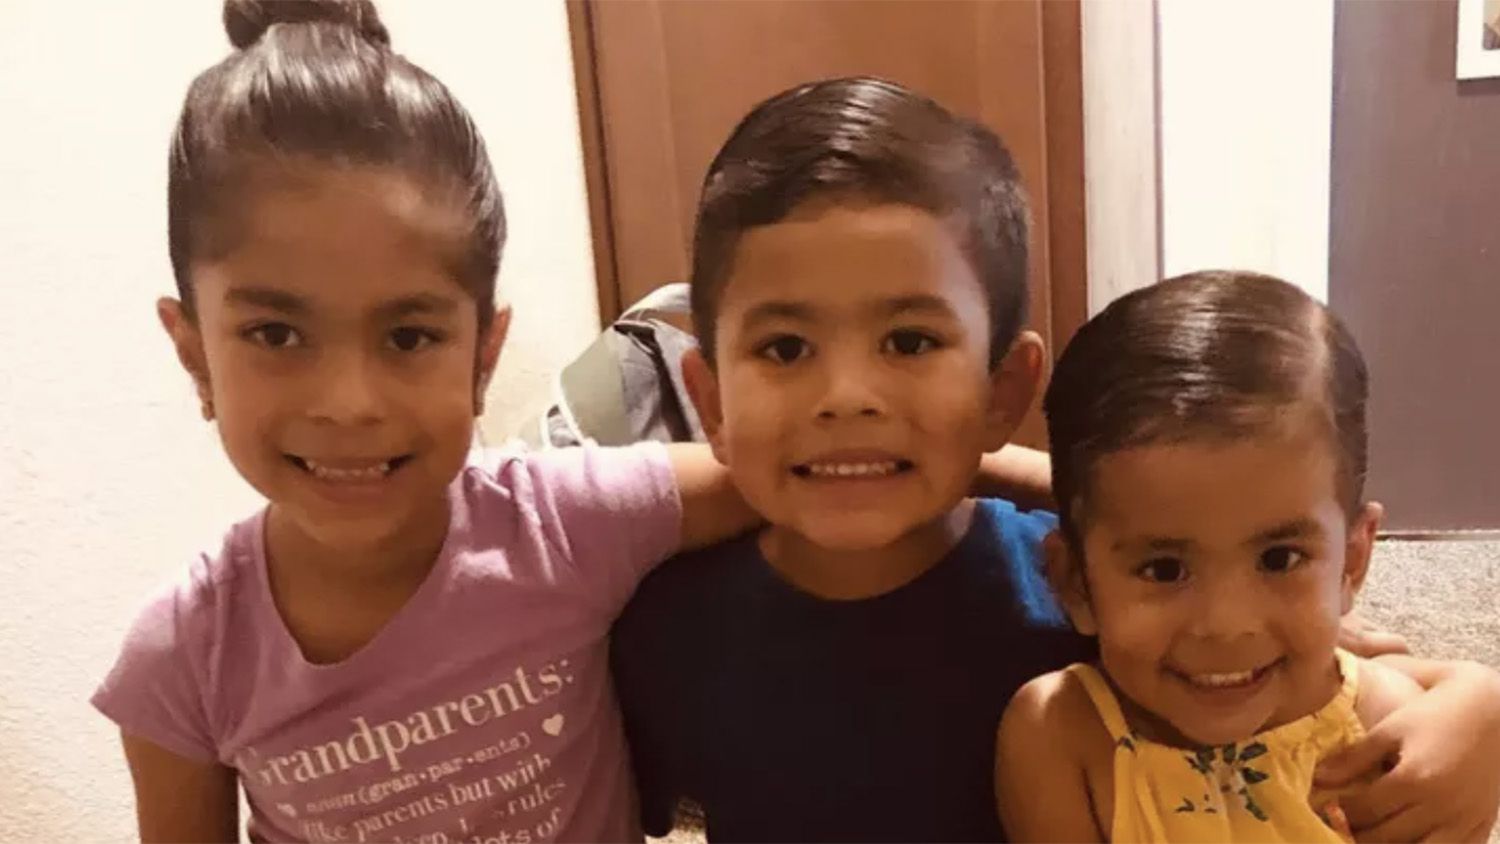 Calif. Mom Allegedly Kills Her 3 Children, All of Whom Were under 8 Years Old,